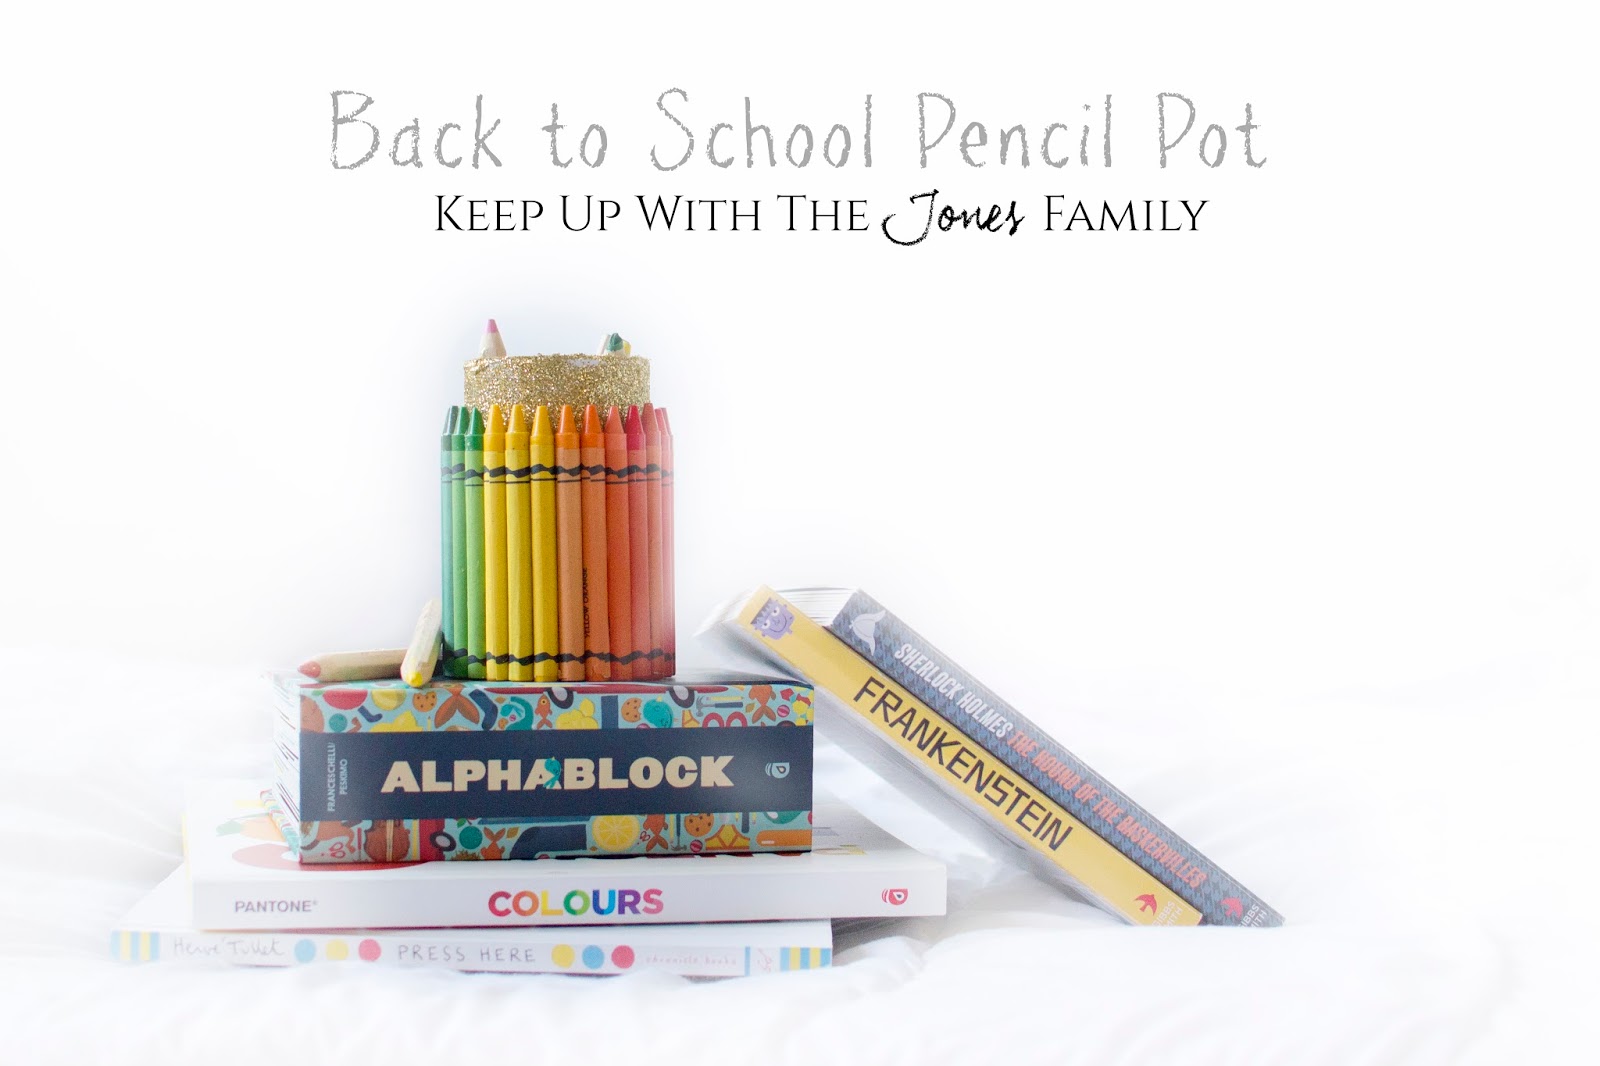 BACK TO SCHOOL PENCIL POT CRAFT: A GIFT FOR TEACHERS